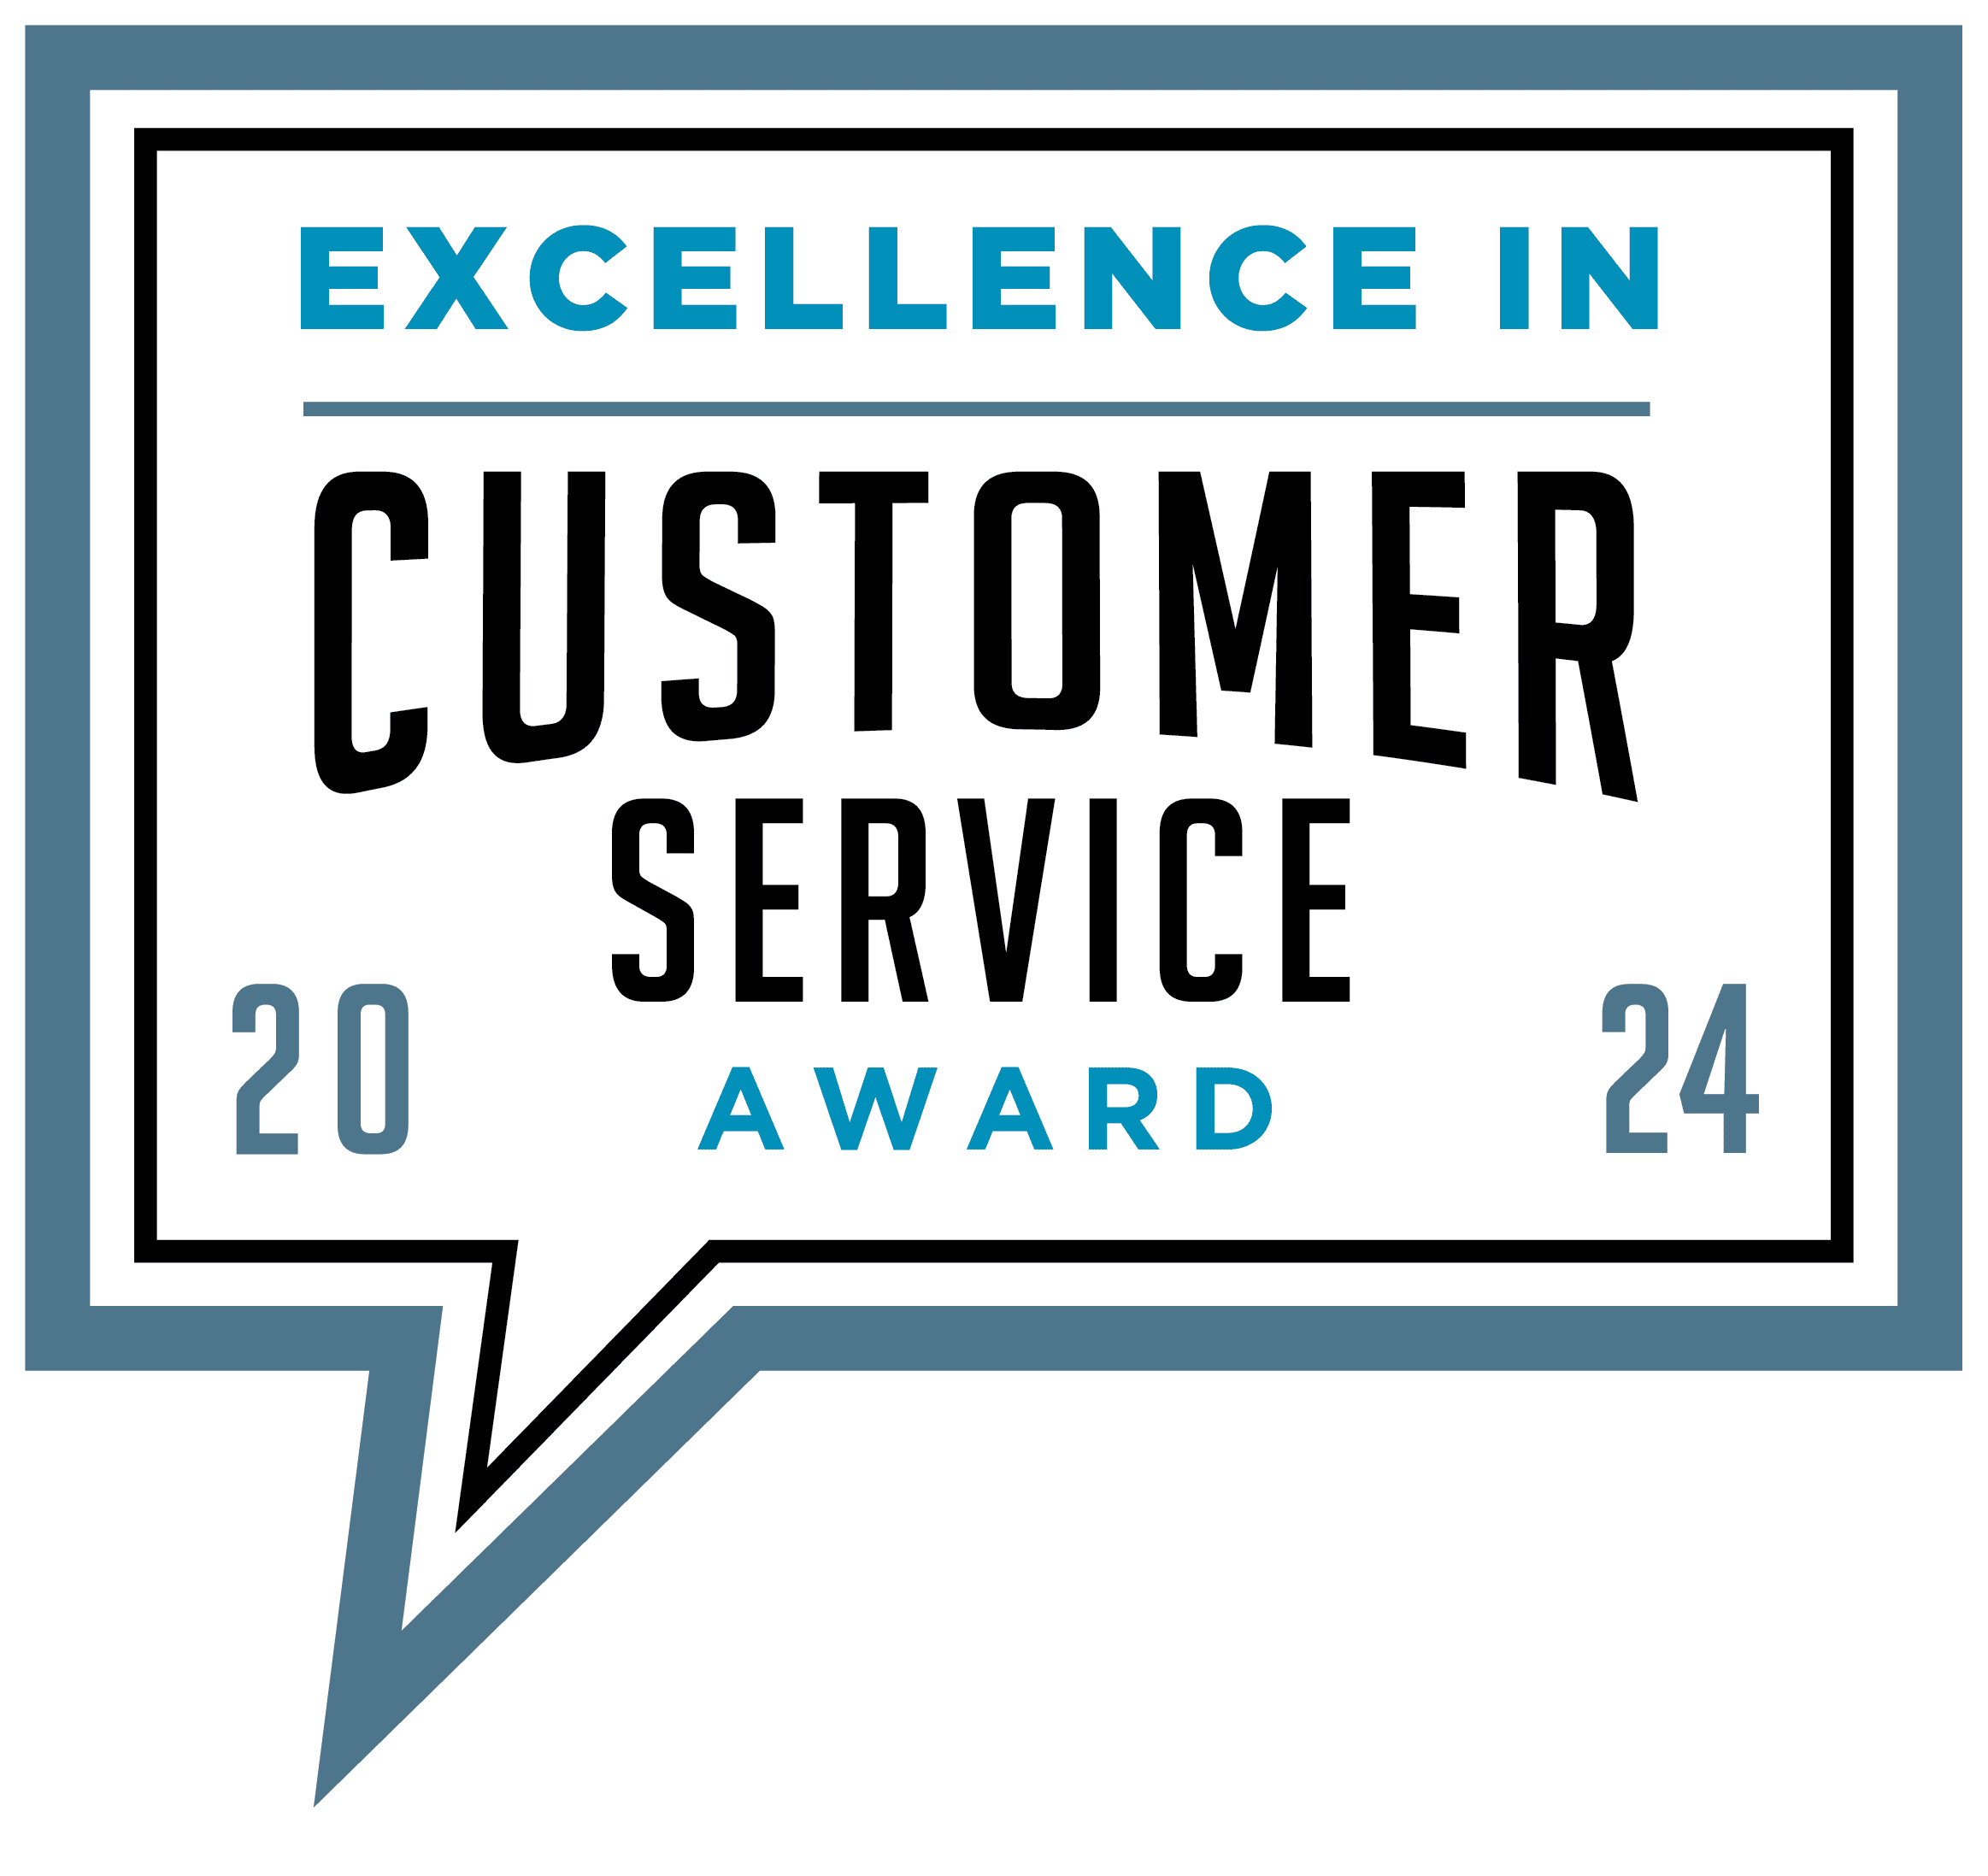 Excellence in Customer Service Award